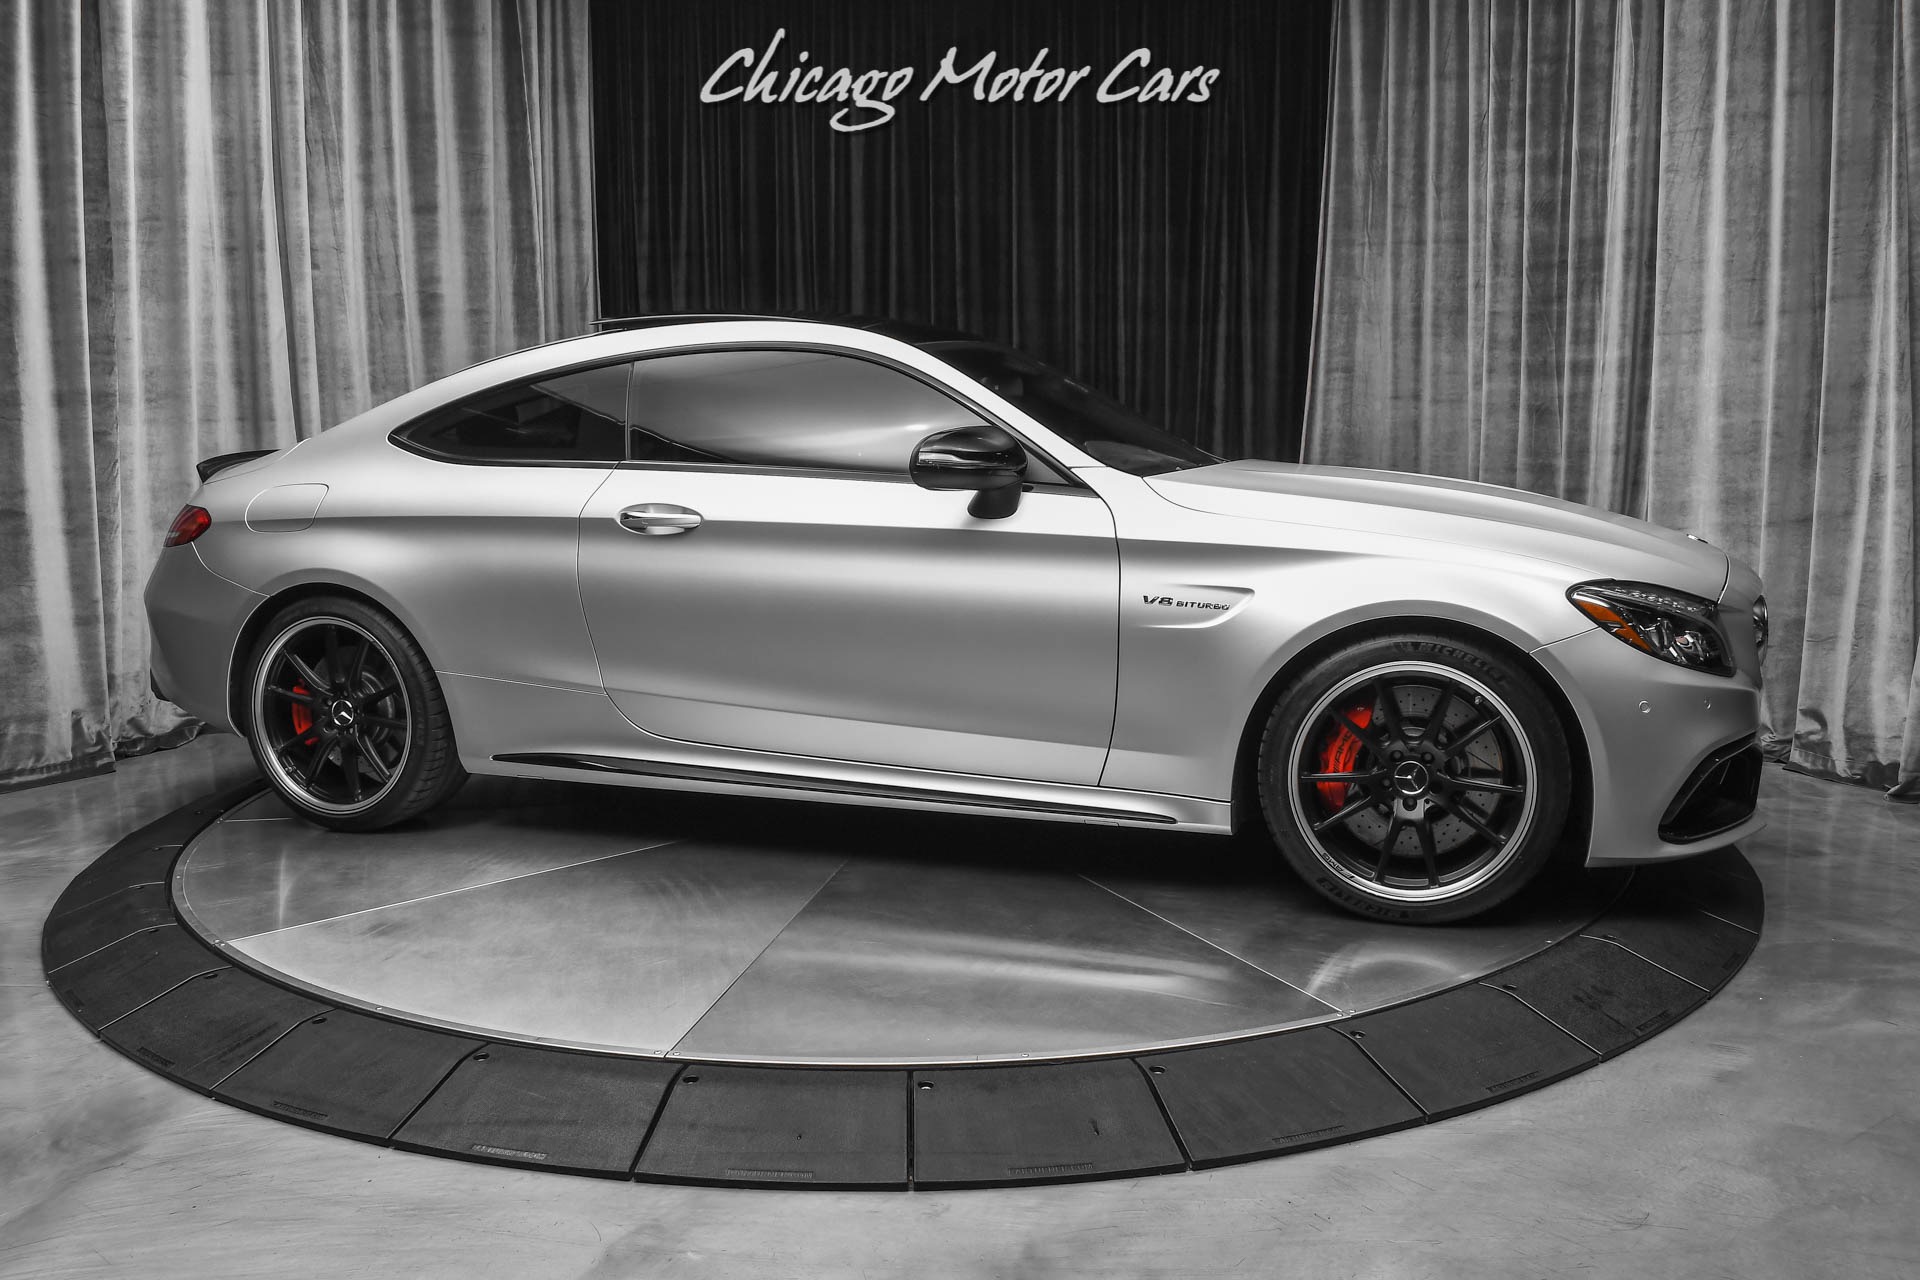 Used 2018 Mercedes-Benz C-Class C63 S AMG Coupe ONE OWNER! 12K MILES! AMG  PERFORMANCE SEATS! For Sale (Special Pricing) | Chicago Motor Cars Stock  #18054